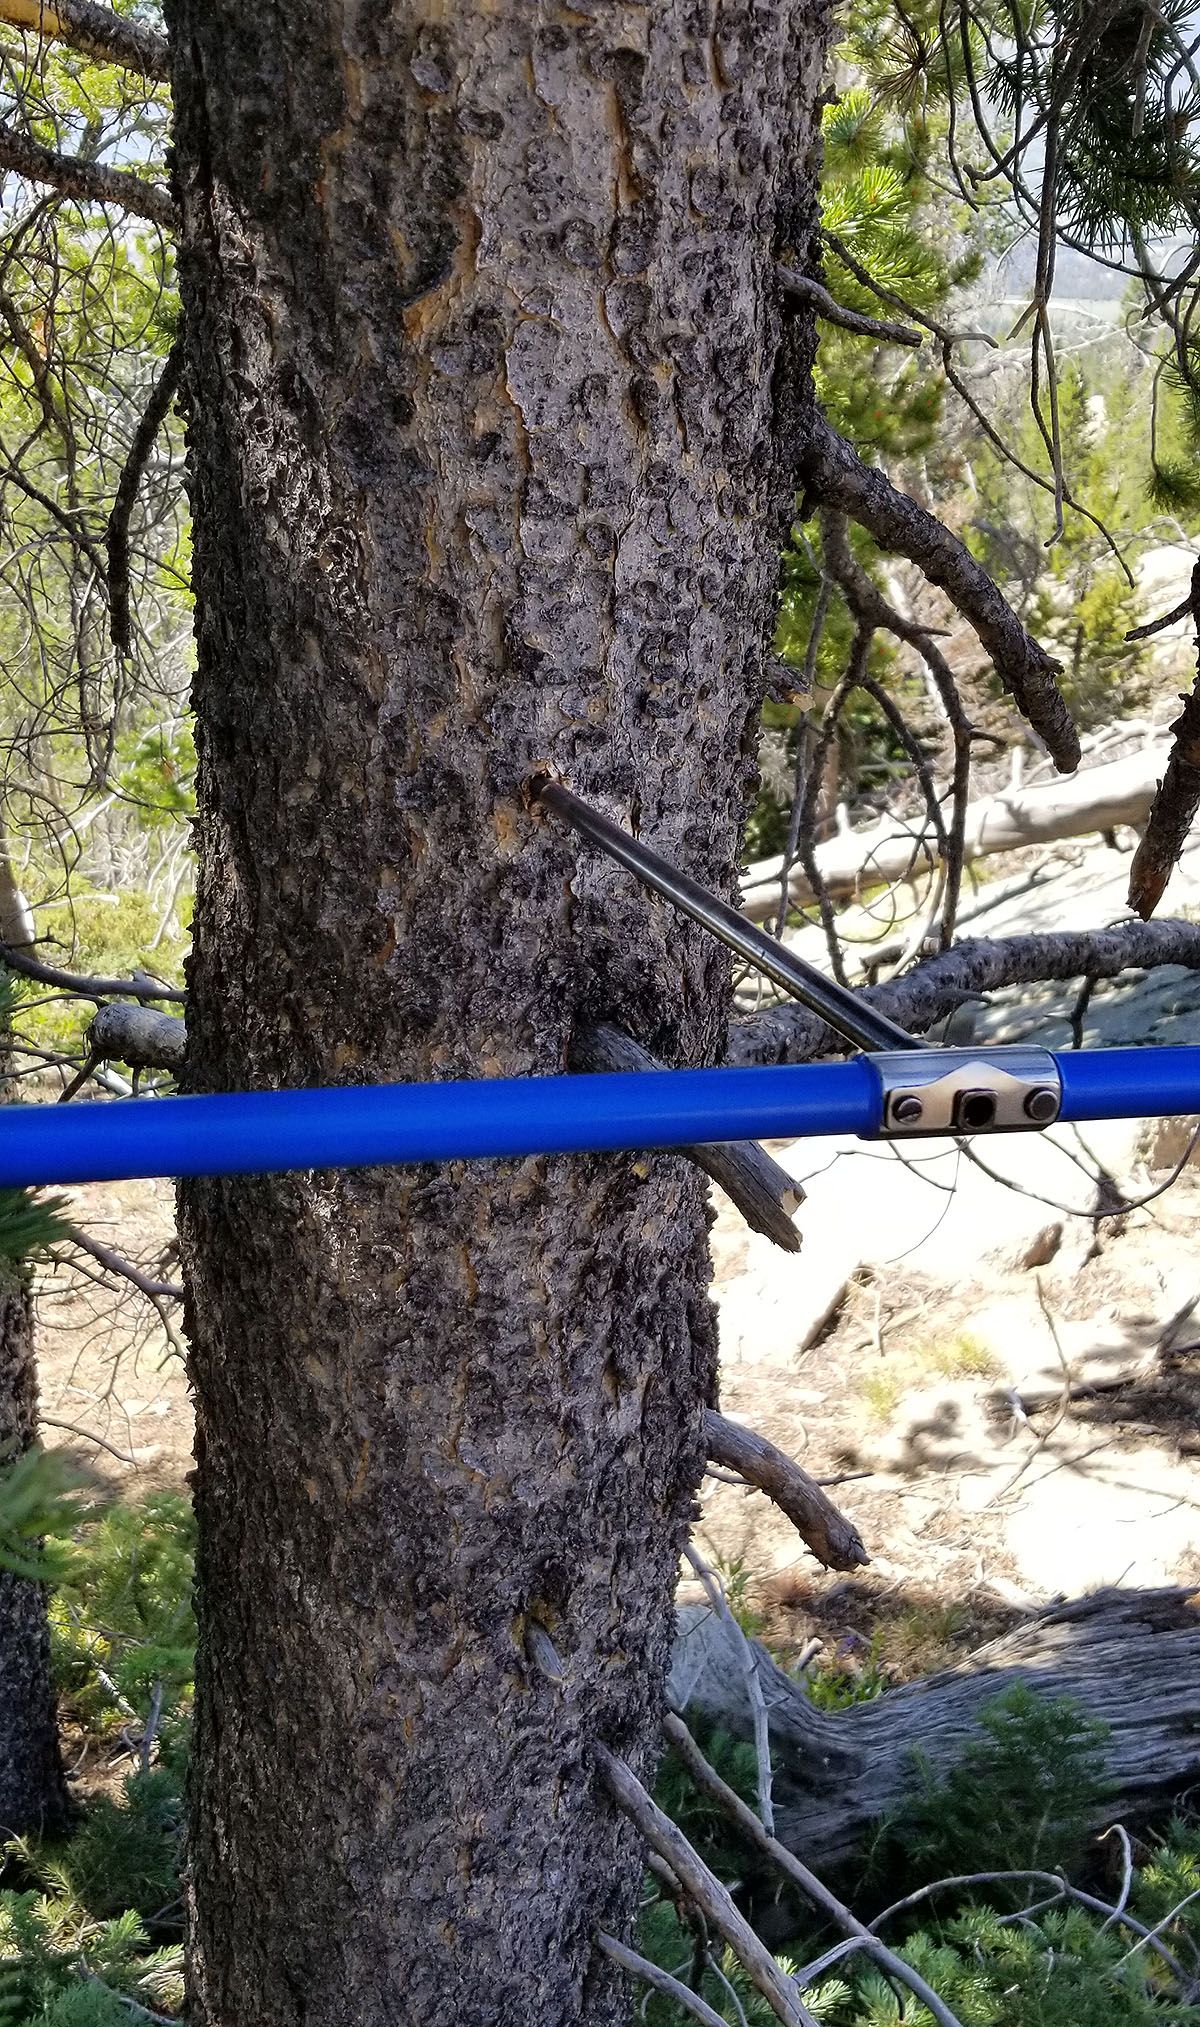 This hand drill is used to extract a core sample from a living tree in Yellowstone National Park for a tree ring study.   (Courtesy of Karen Heeter)